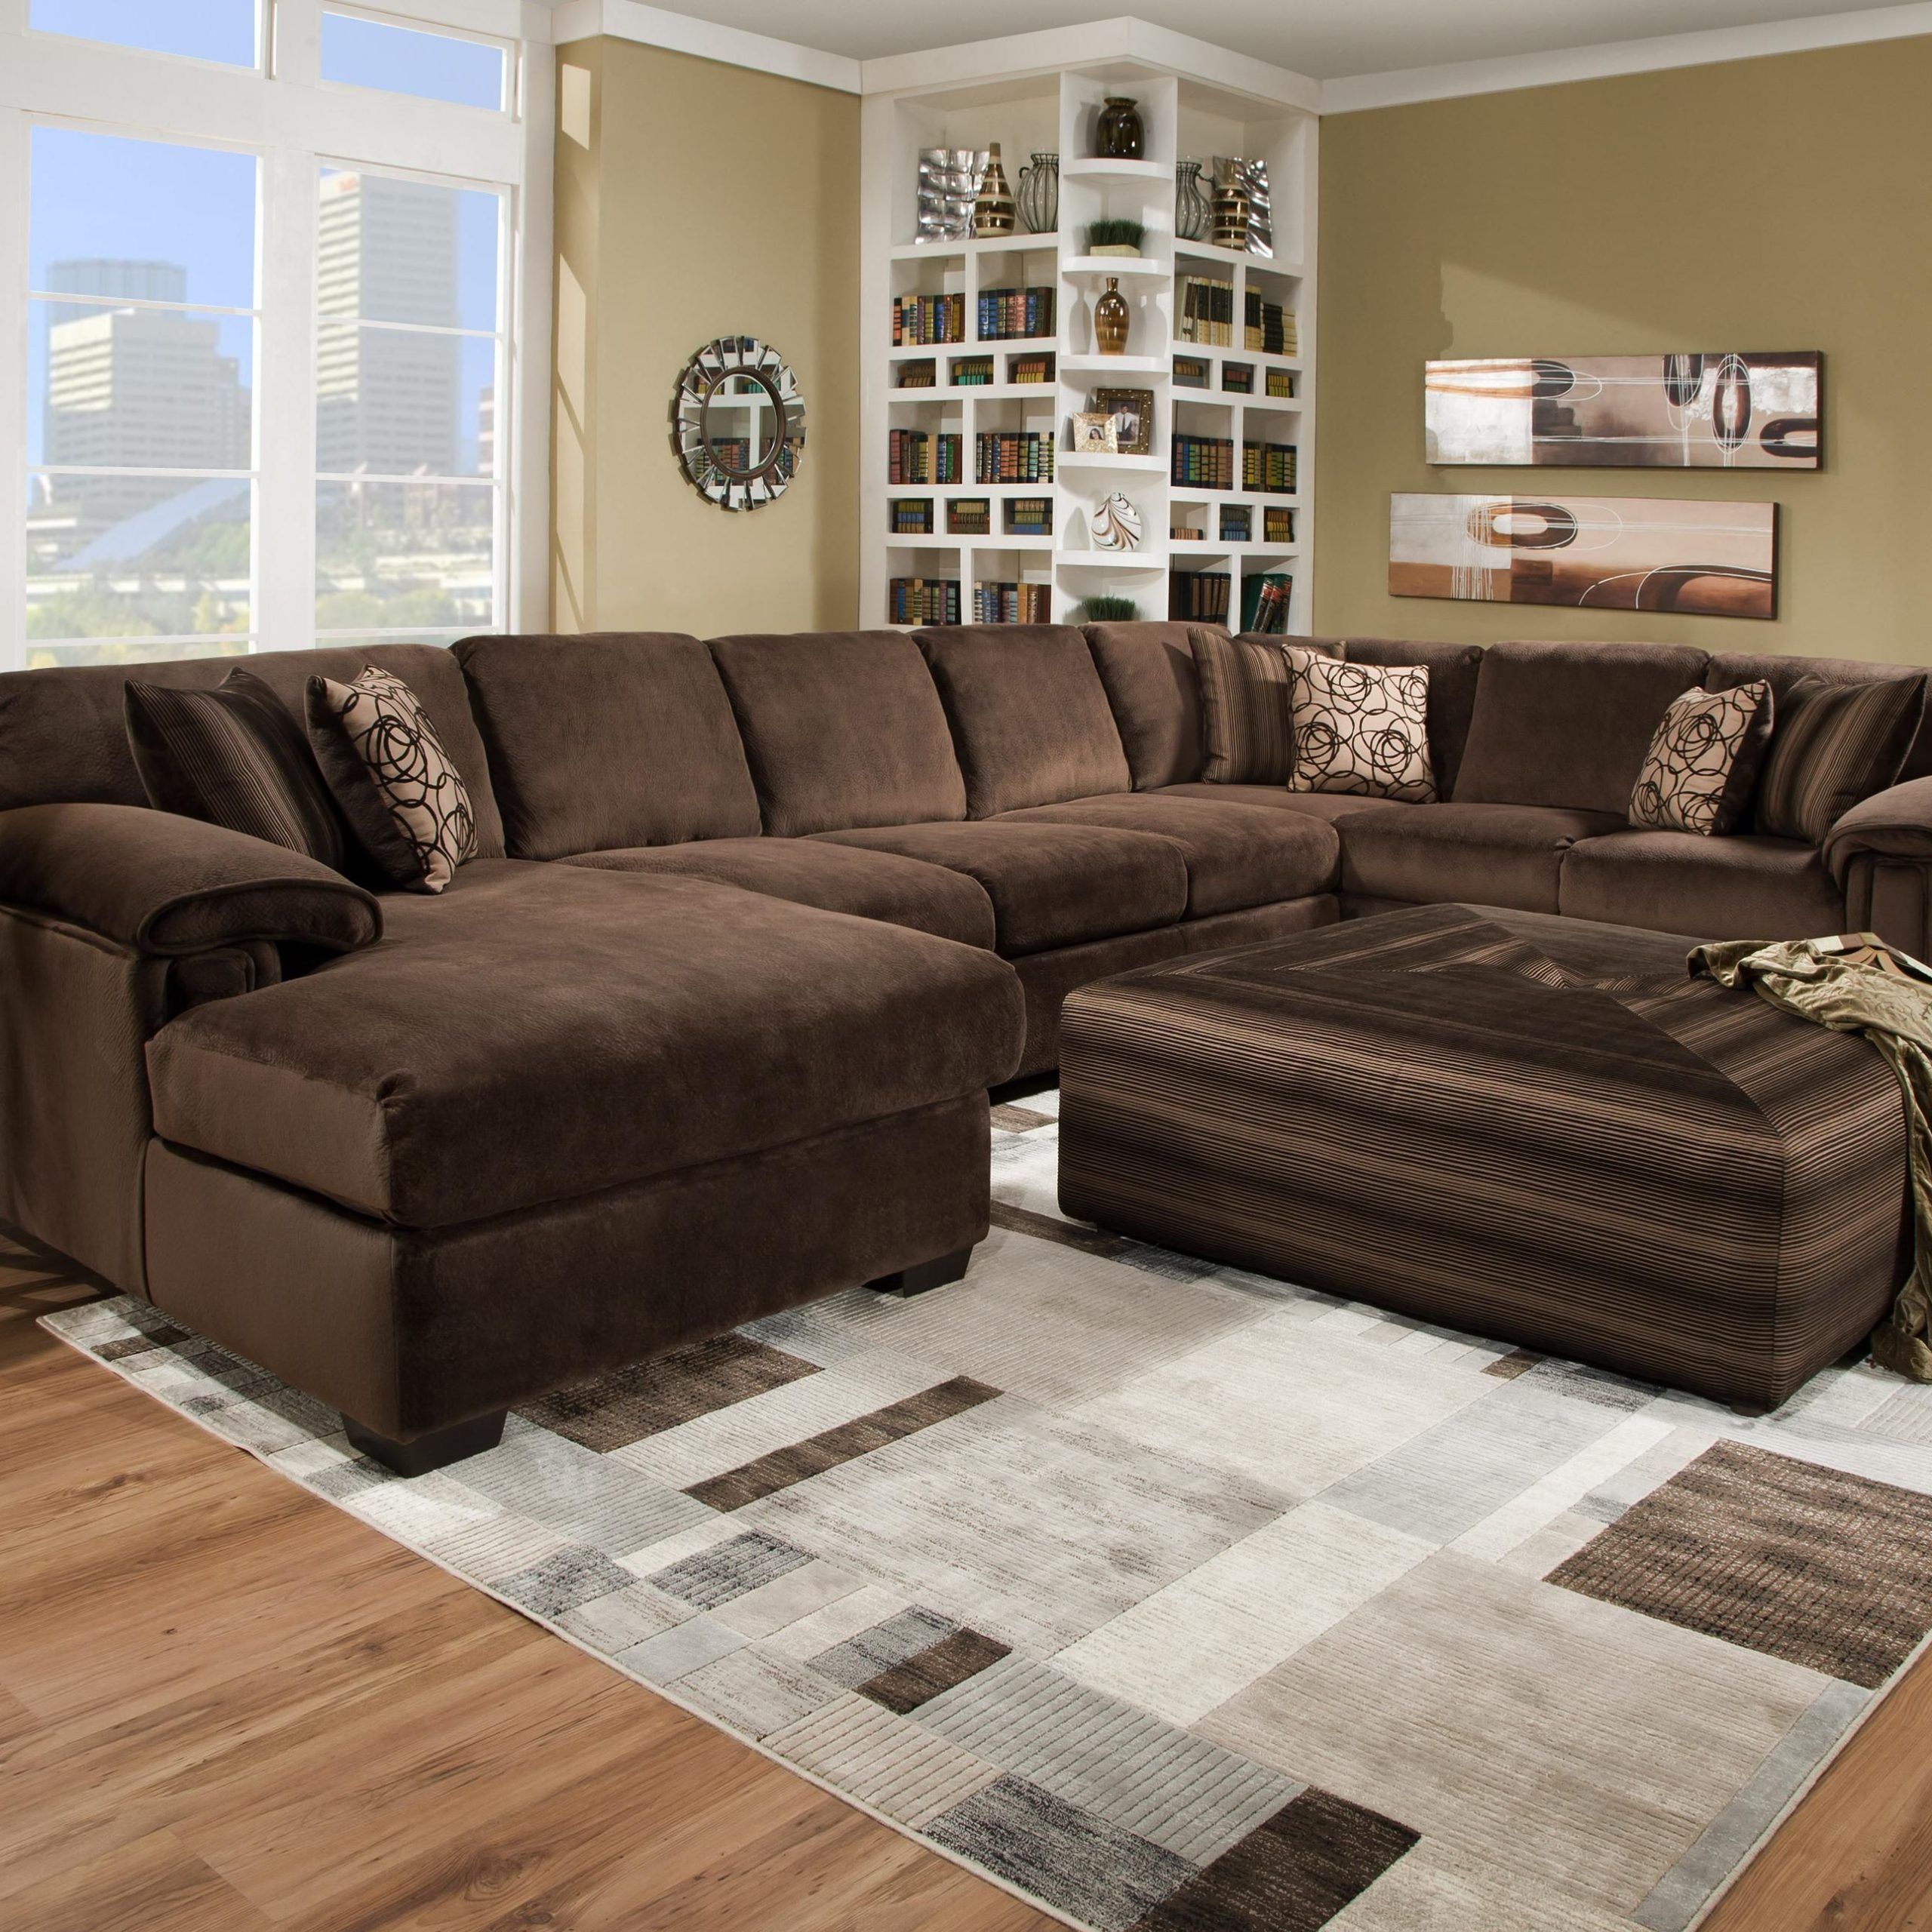 Chocolate Brown Velvet Sectional Sofa | Brown Living Room Decor Throughout Sofas With Ottomans In Brown (Gallery 9 of 20)